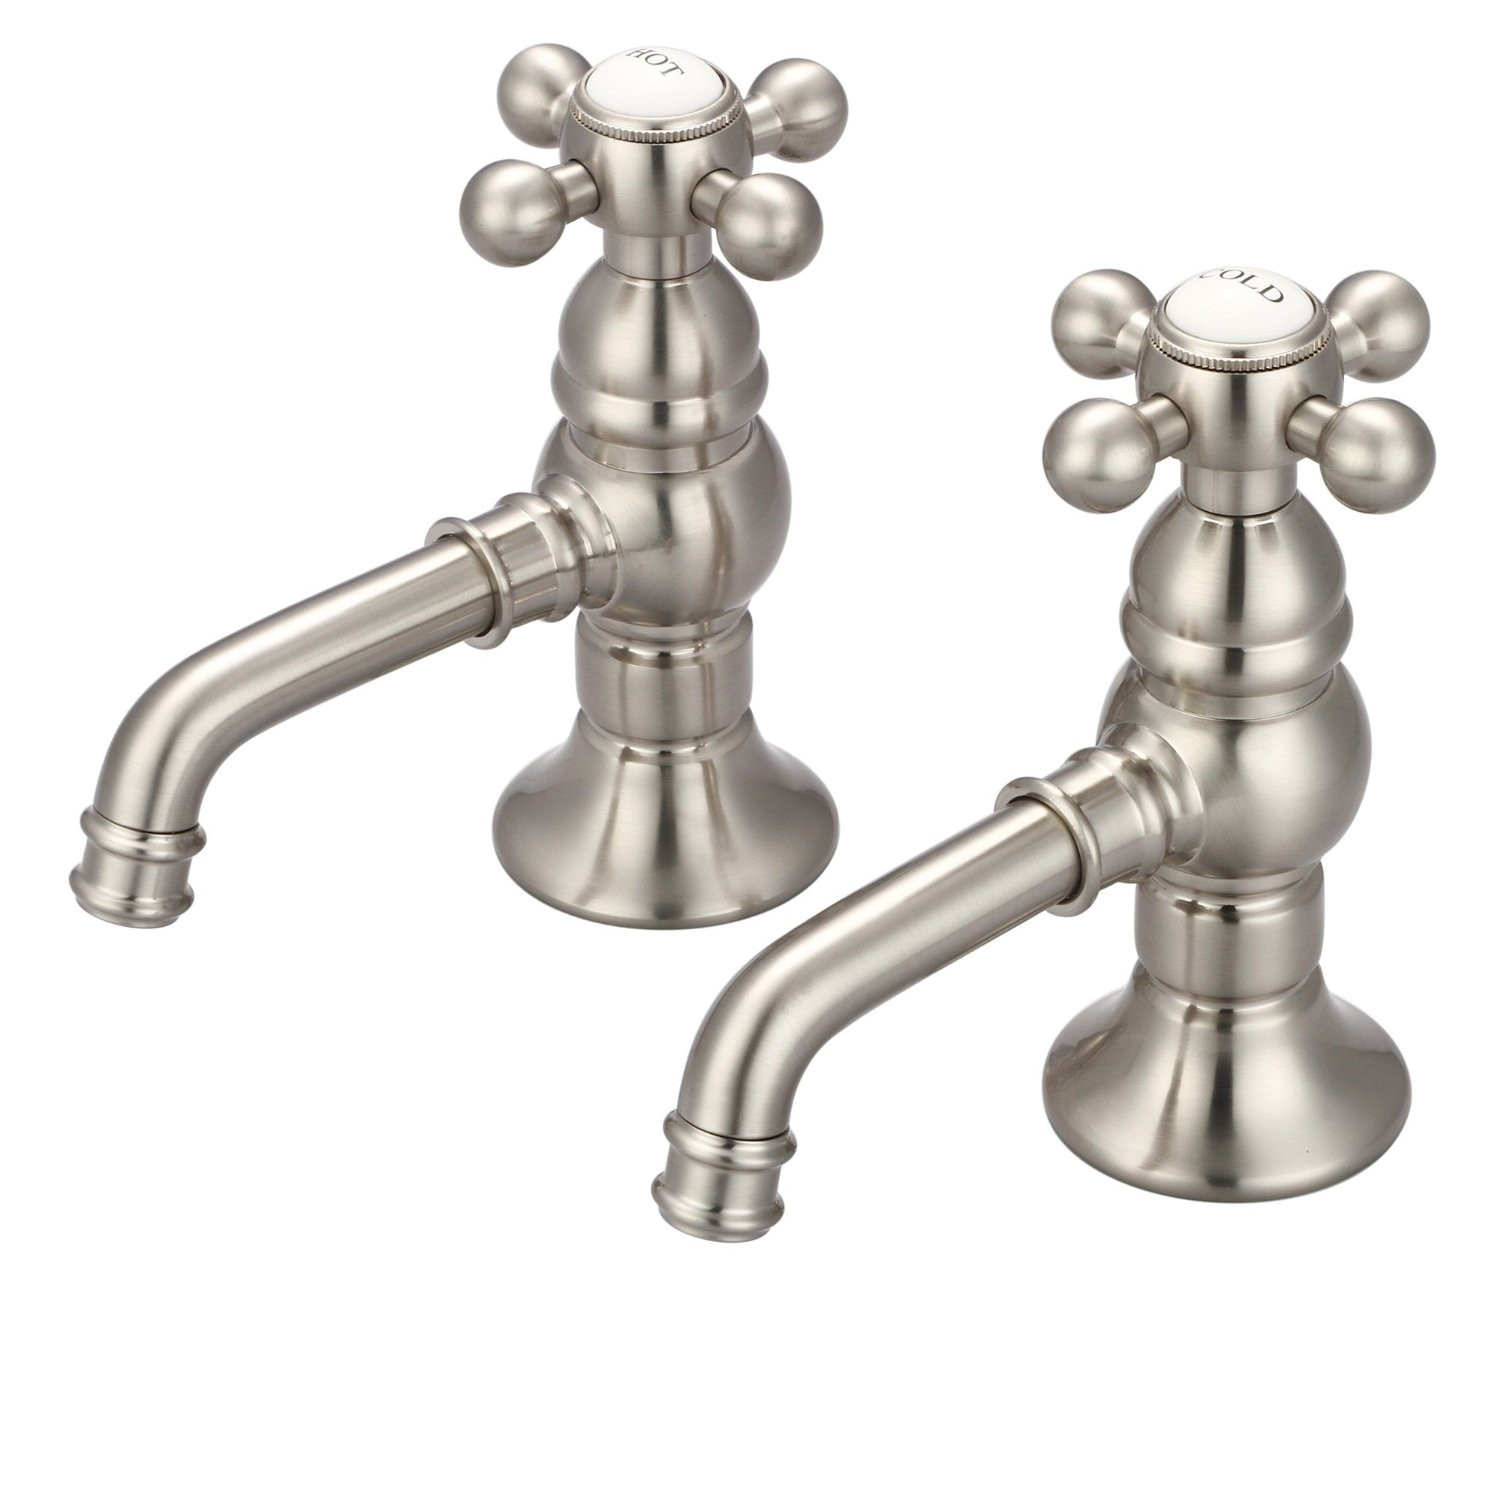 Water Creation F1-0002-02-PL Basin Cocks Lavatory Faucet in Brushed Nickel, Image Shown with Cross Handle